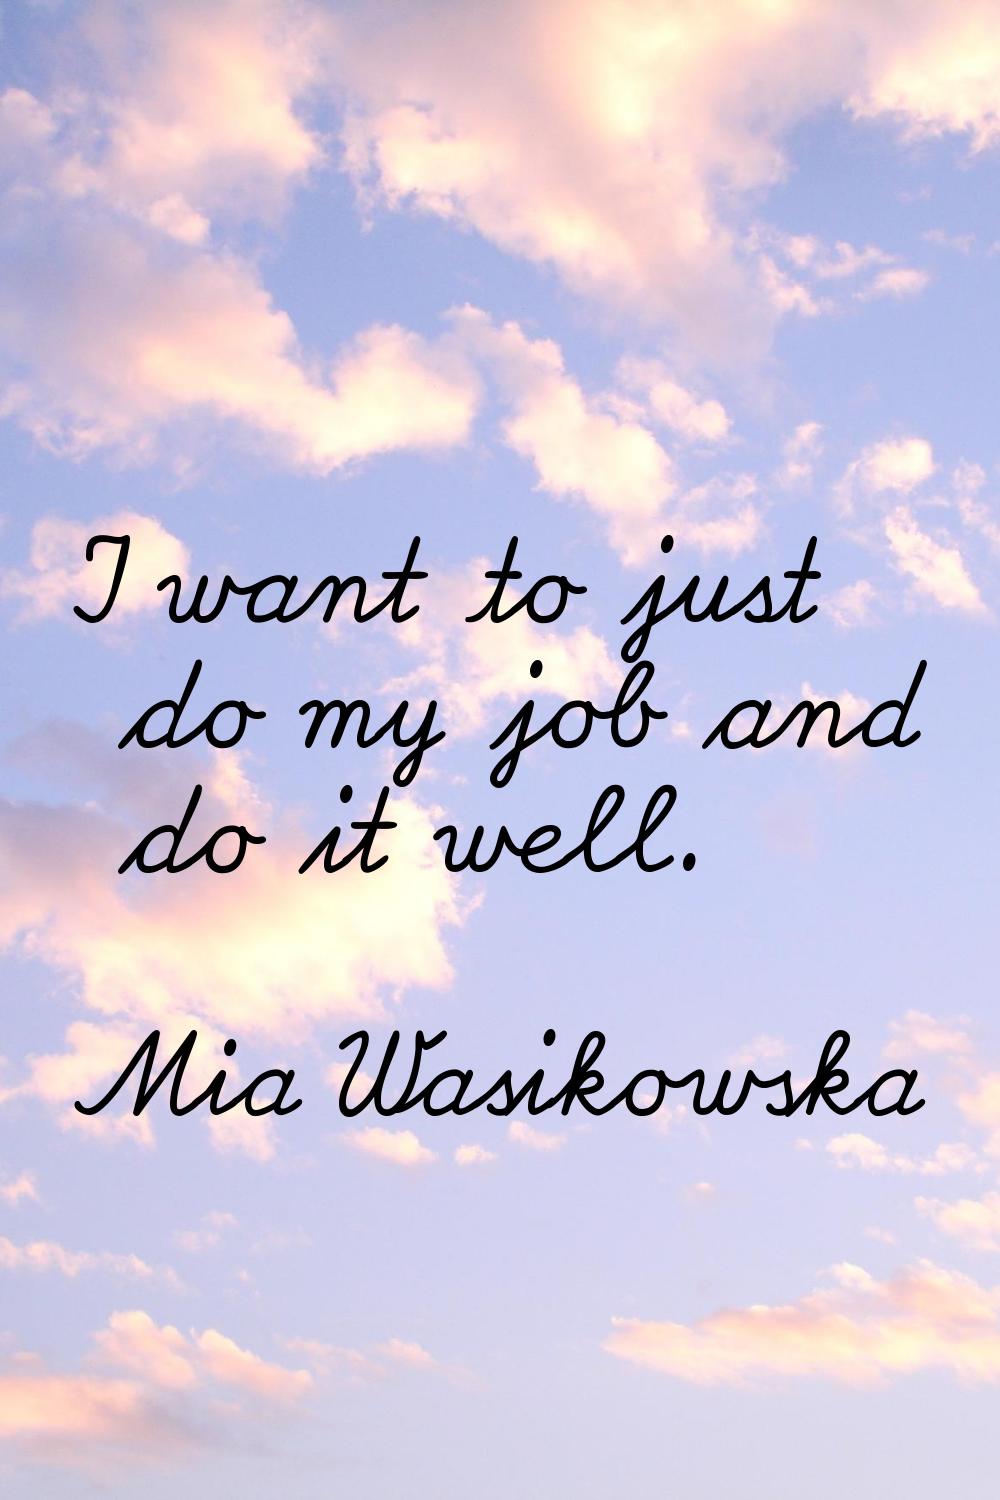 I want to just do my job and do it well.